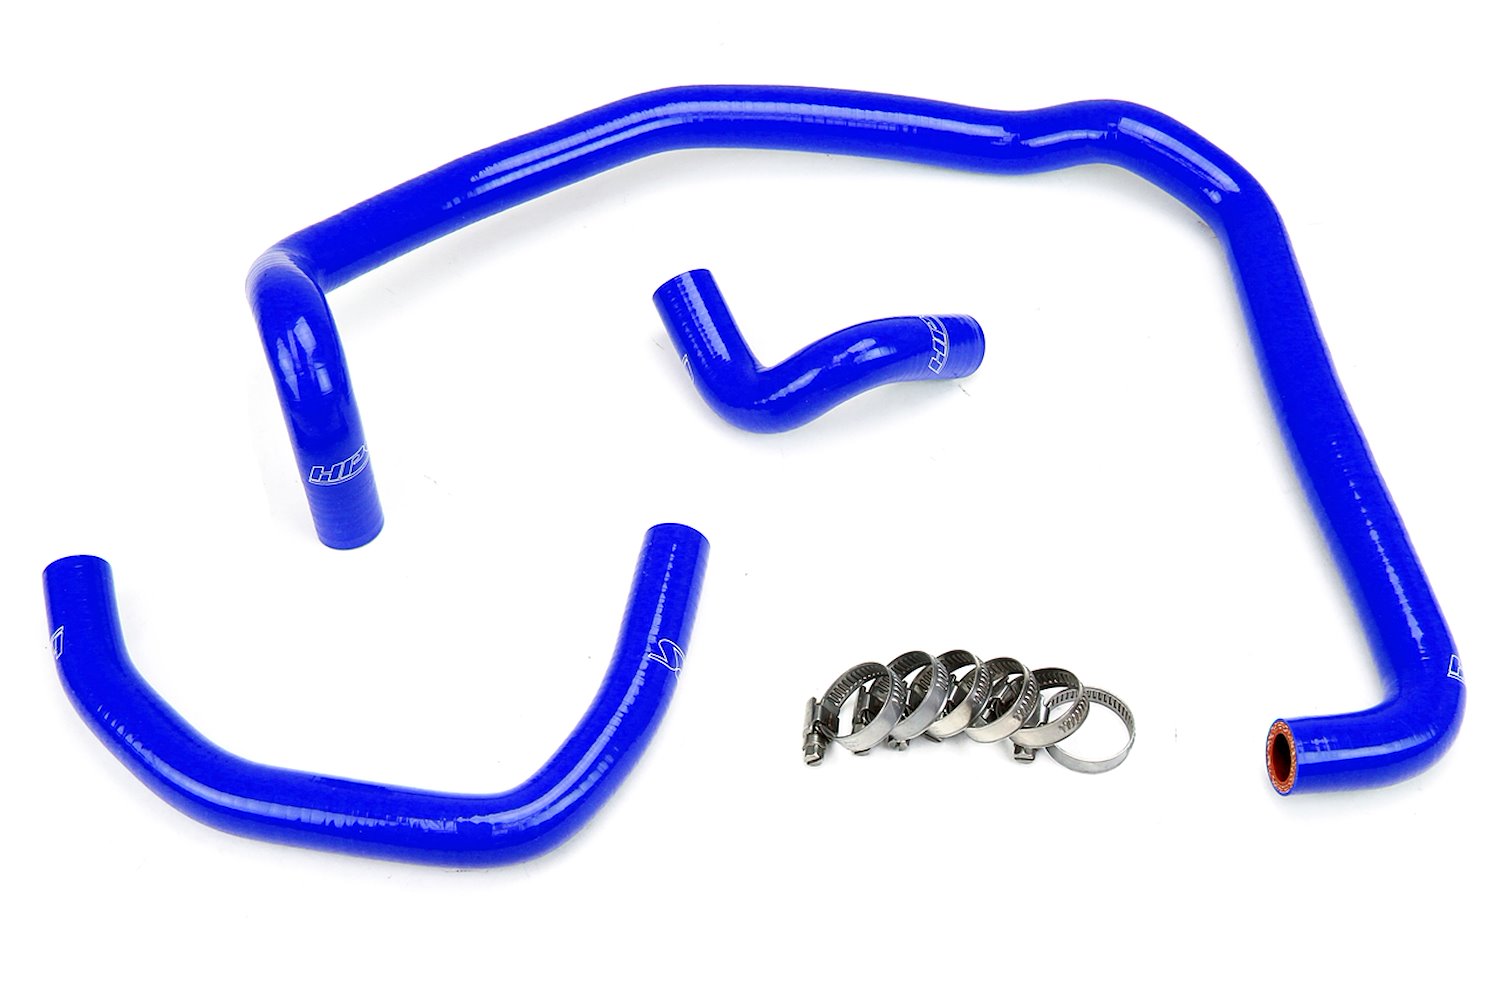 57-1746H-BLUE Heater Hose Kit, High-Temp 3-Ply Reinforced Silicone, Replace OEM Rubber Heater Coolant Hoses